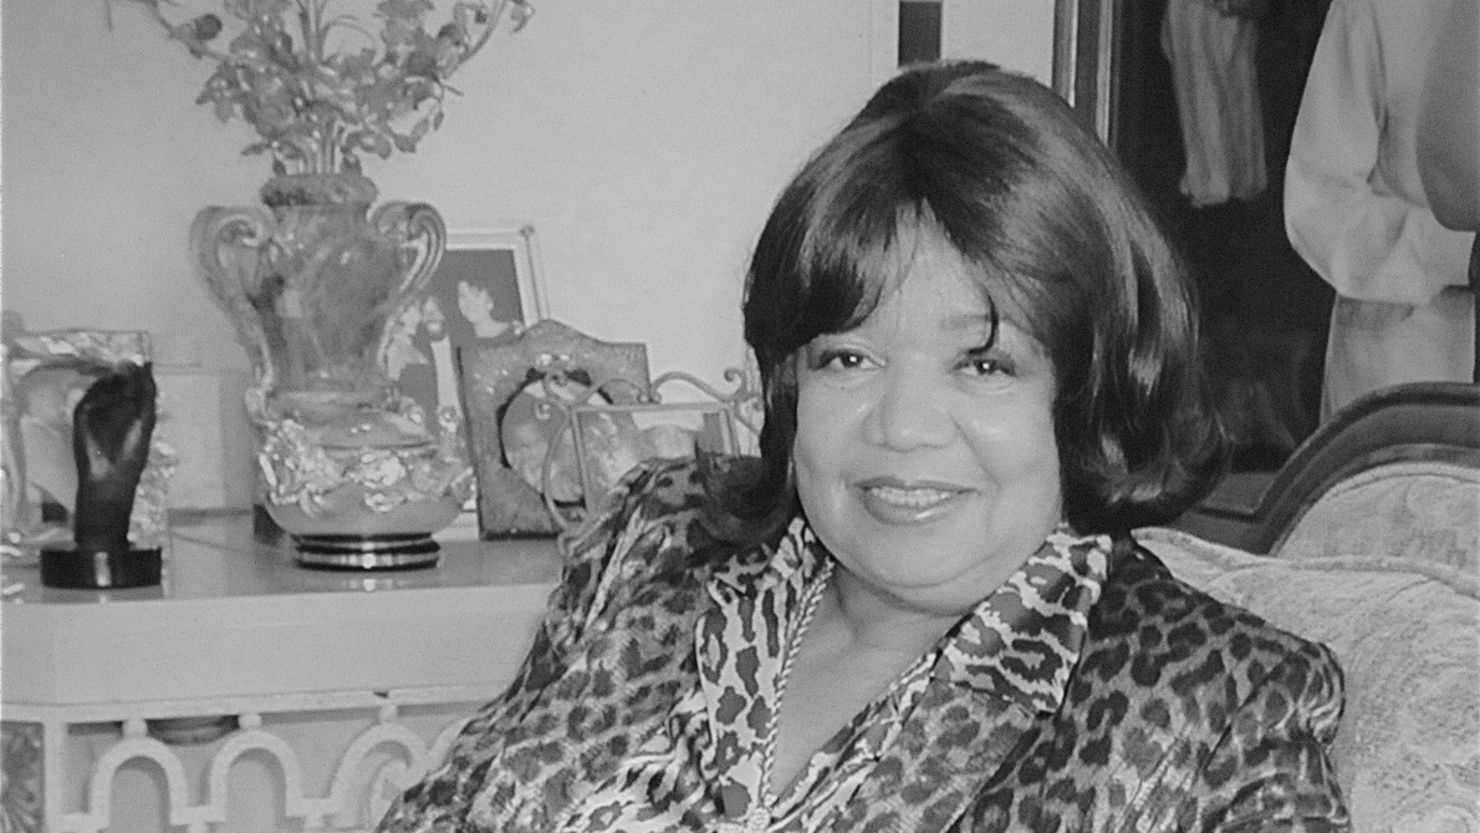 Anna Gordy Gaye, older sister of Berry Gordy and ex-wife of Marvin Gaye, died at 92.